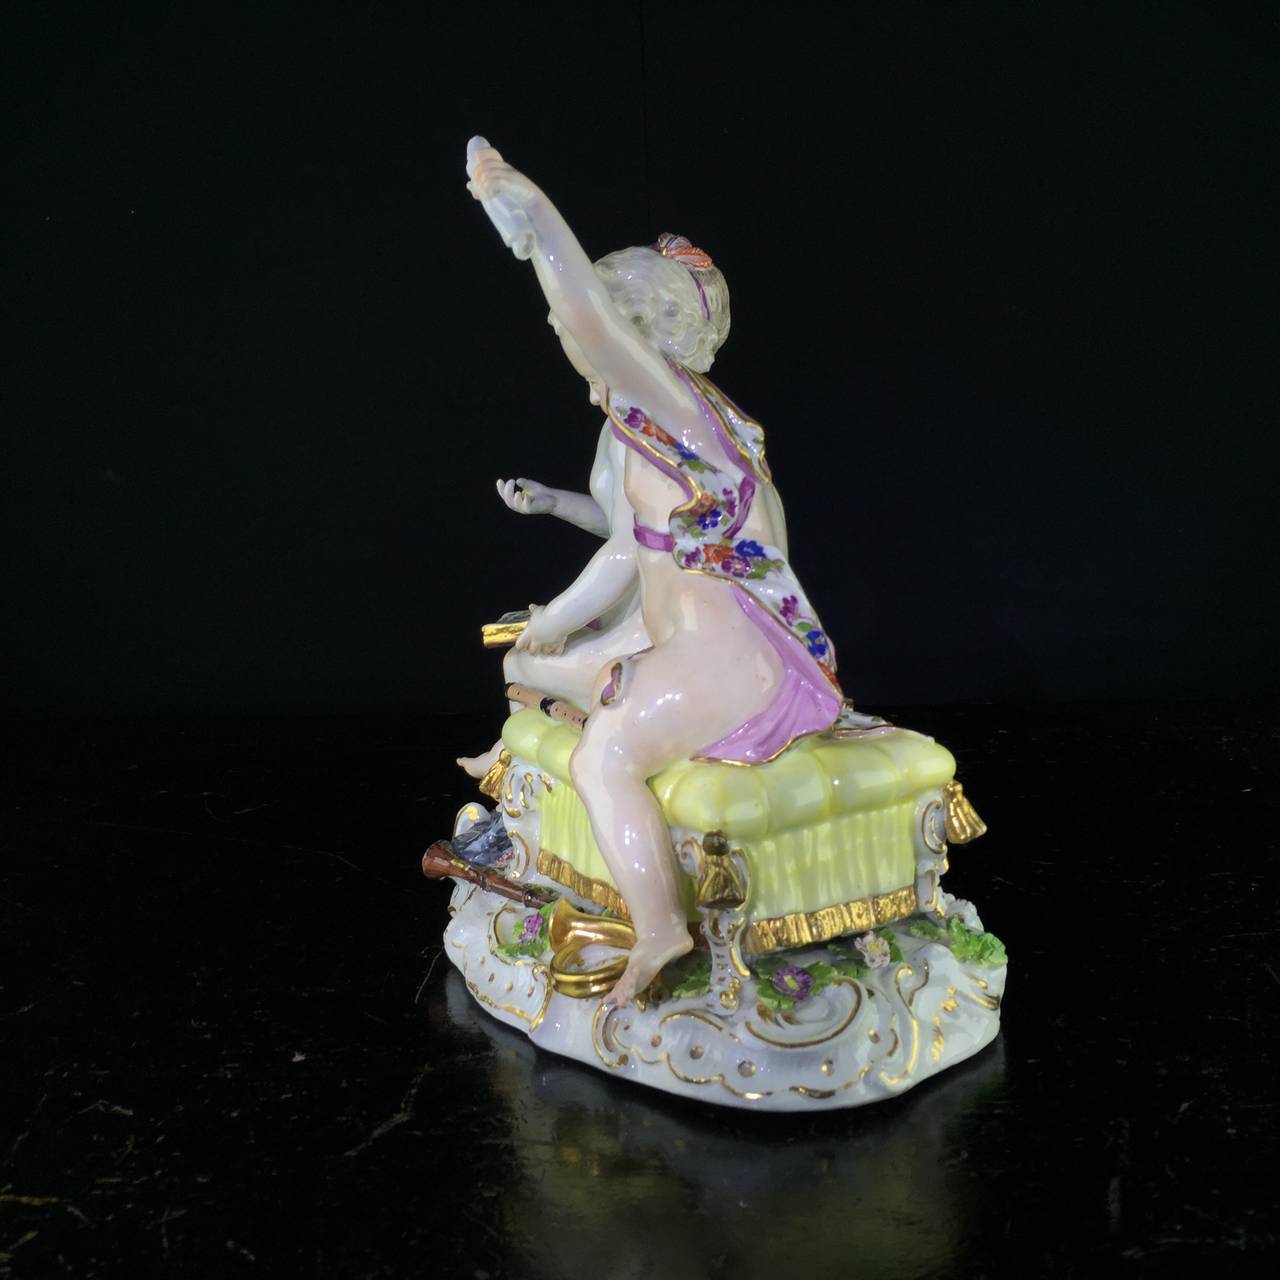 Meissen figure group of musical children, with a semi-clad girl & boy seated in a large yellow upholstered stool with gilt fringe and tassels, singing from an open book with musical notes and the title ‘Aria.’, with various instruments scattered